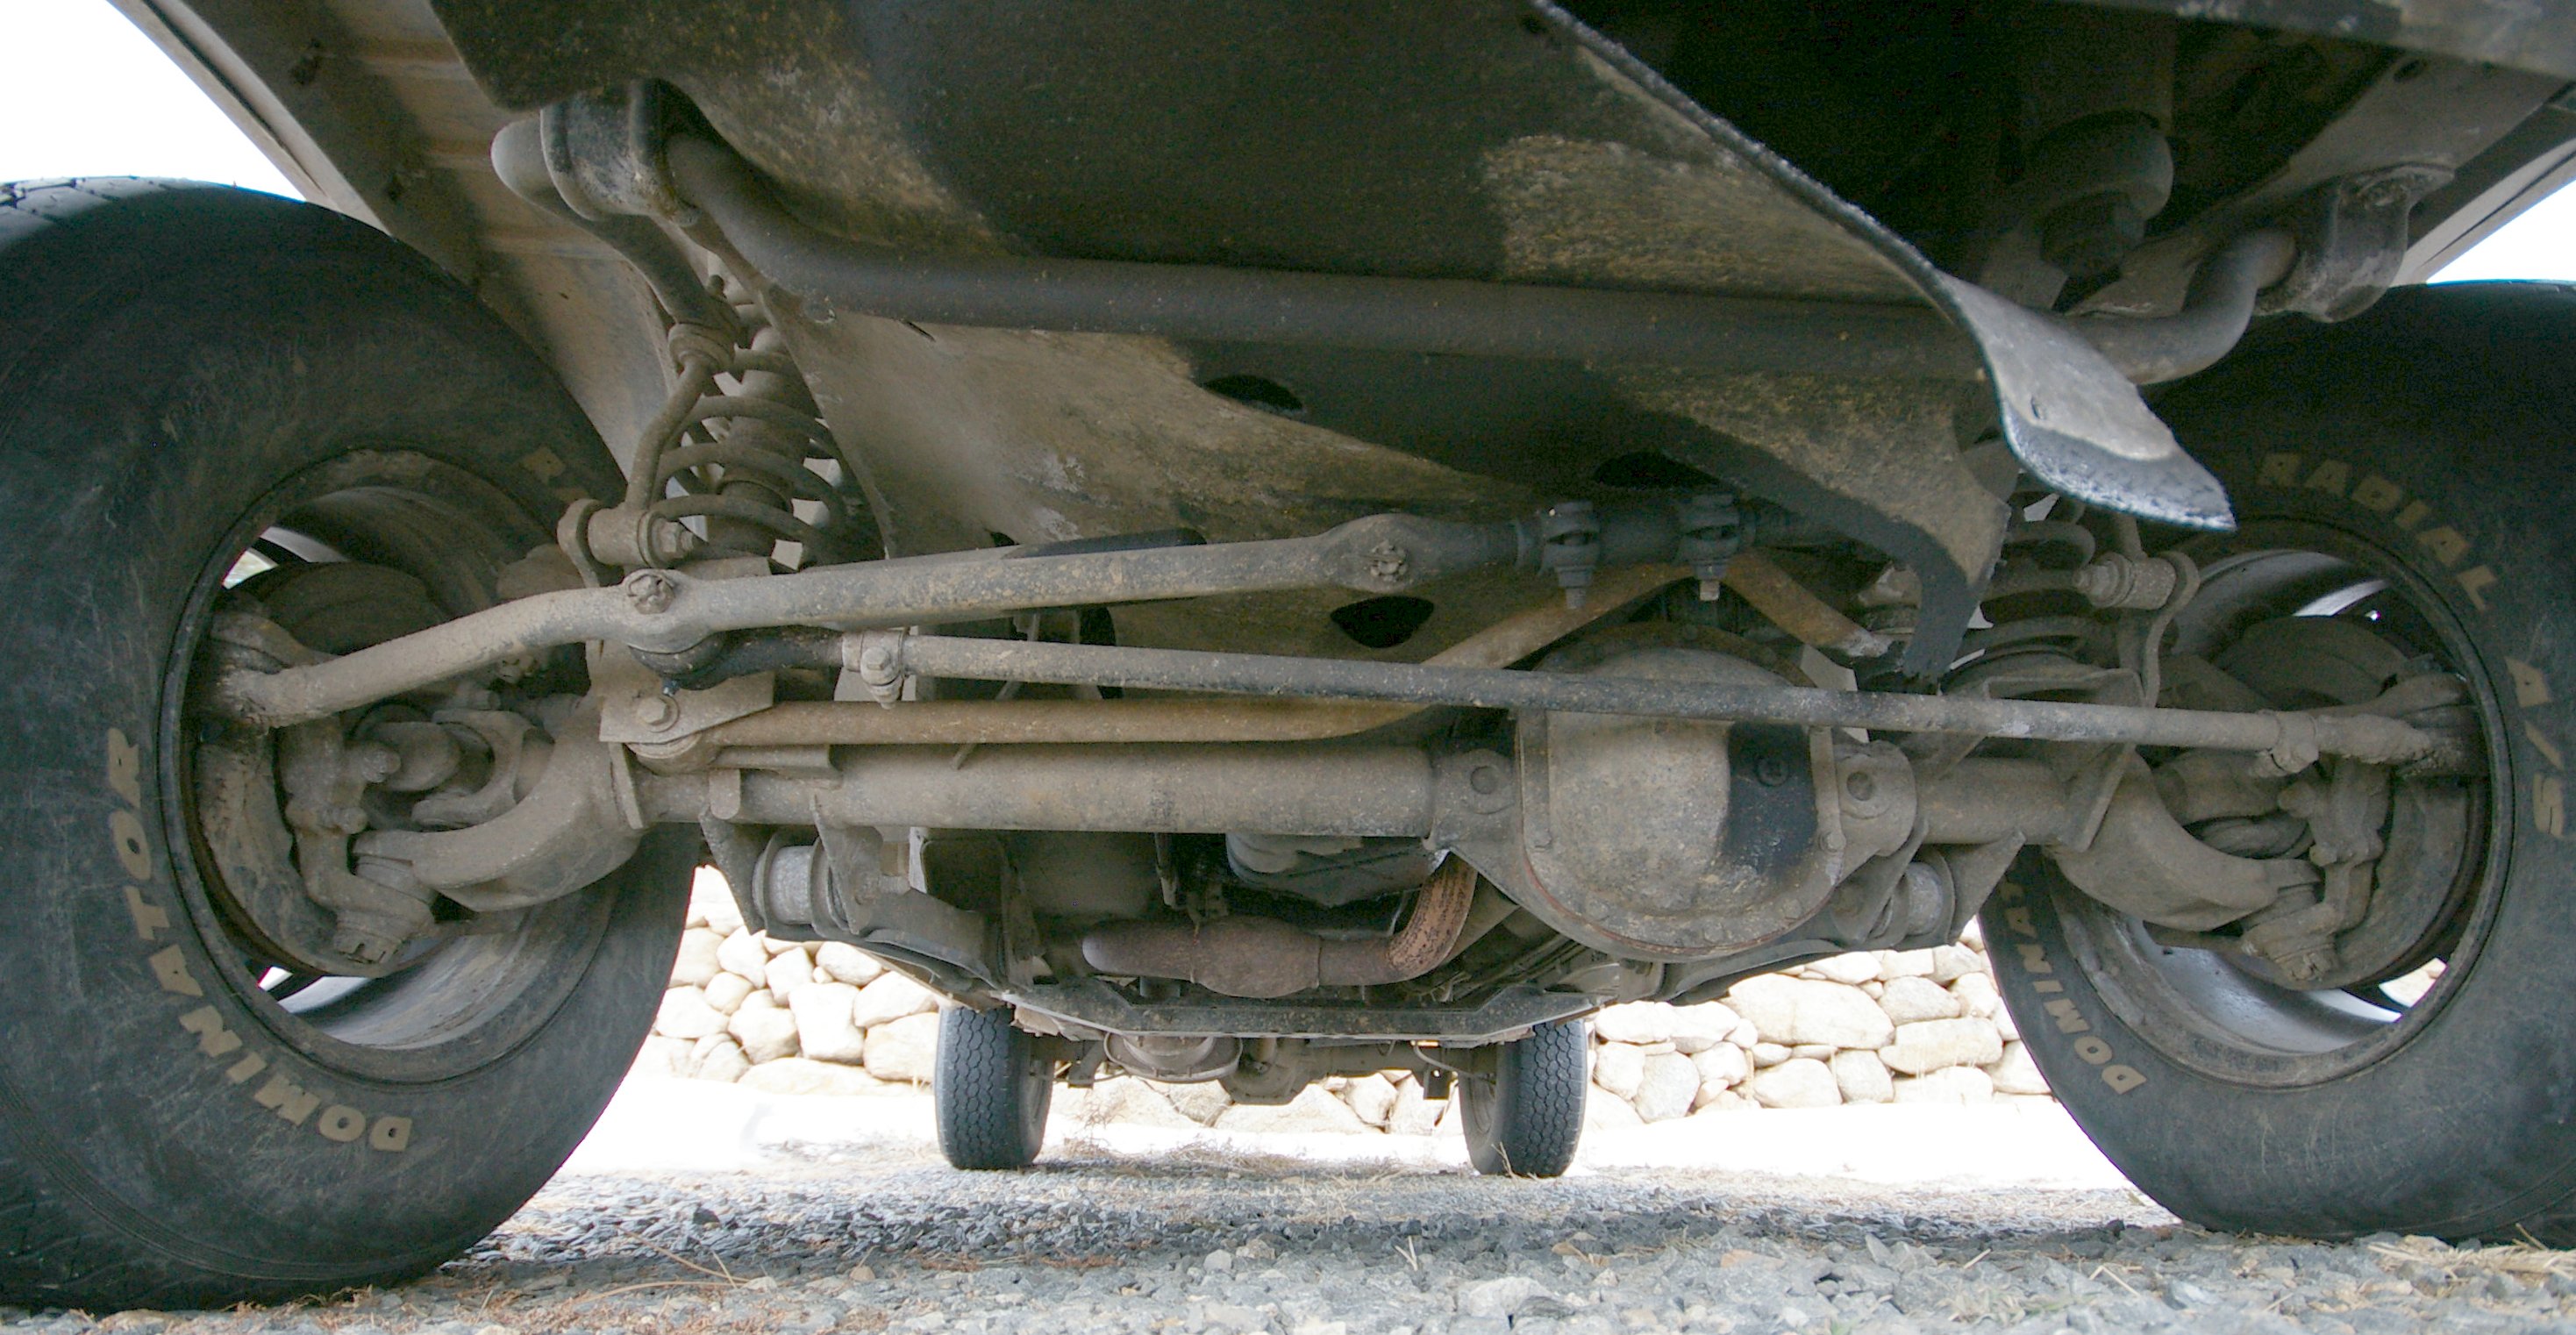 How to check for car axles problems?